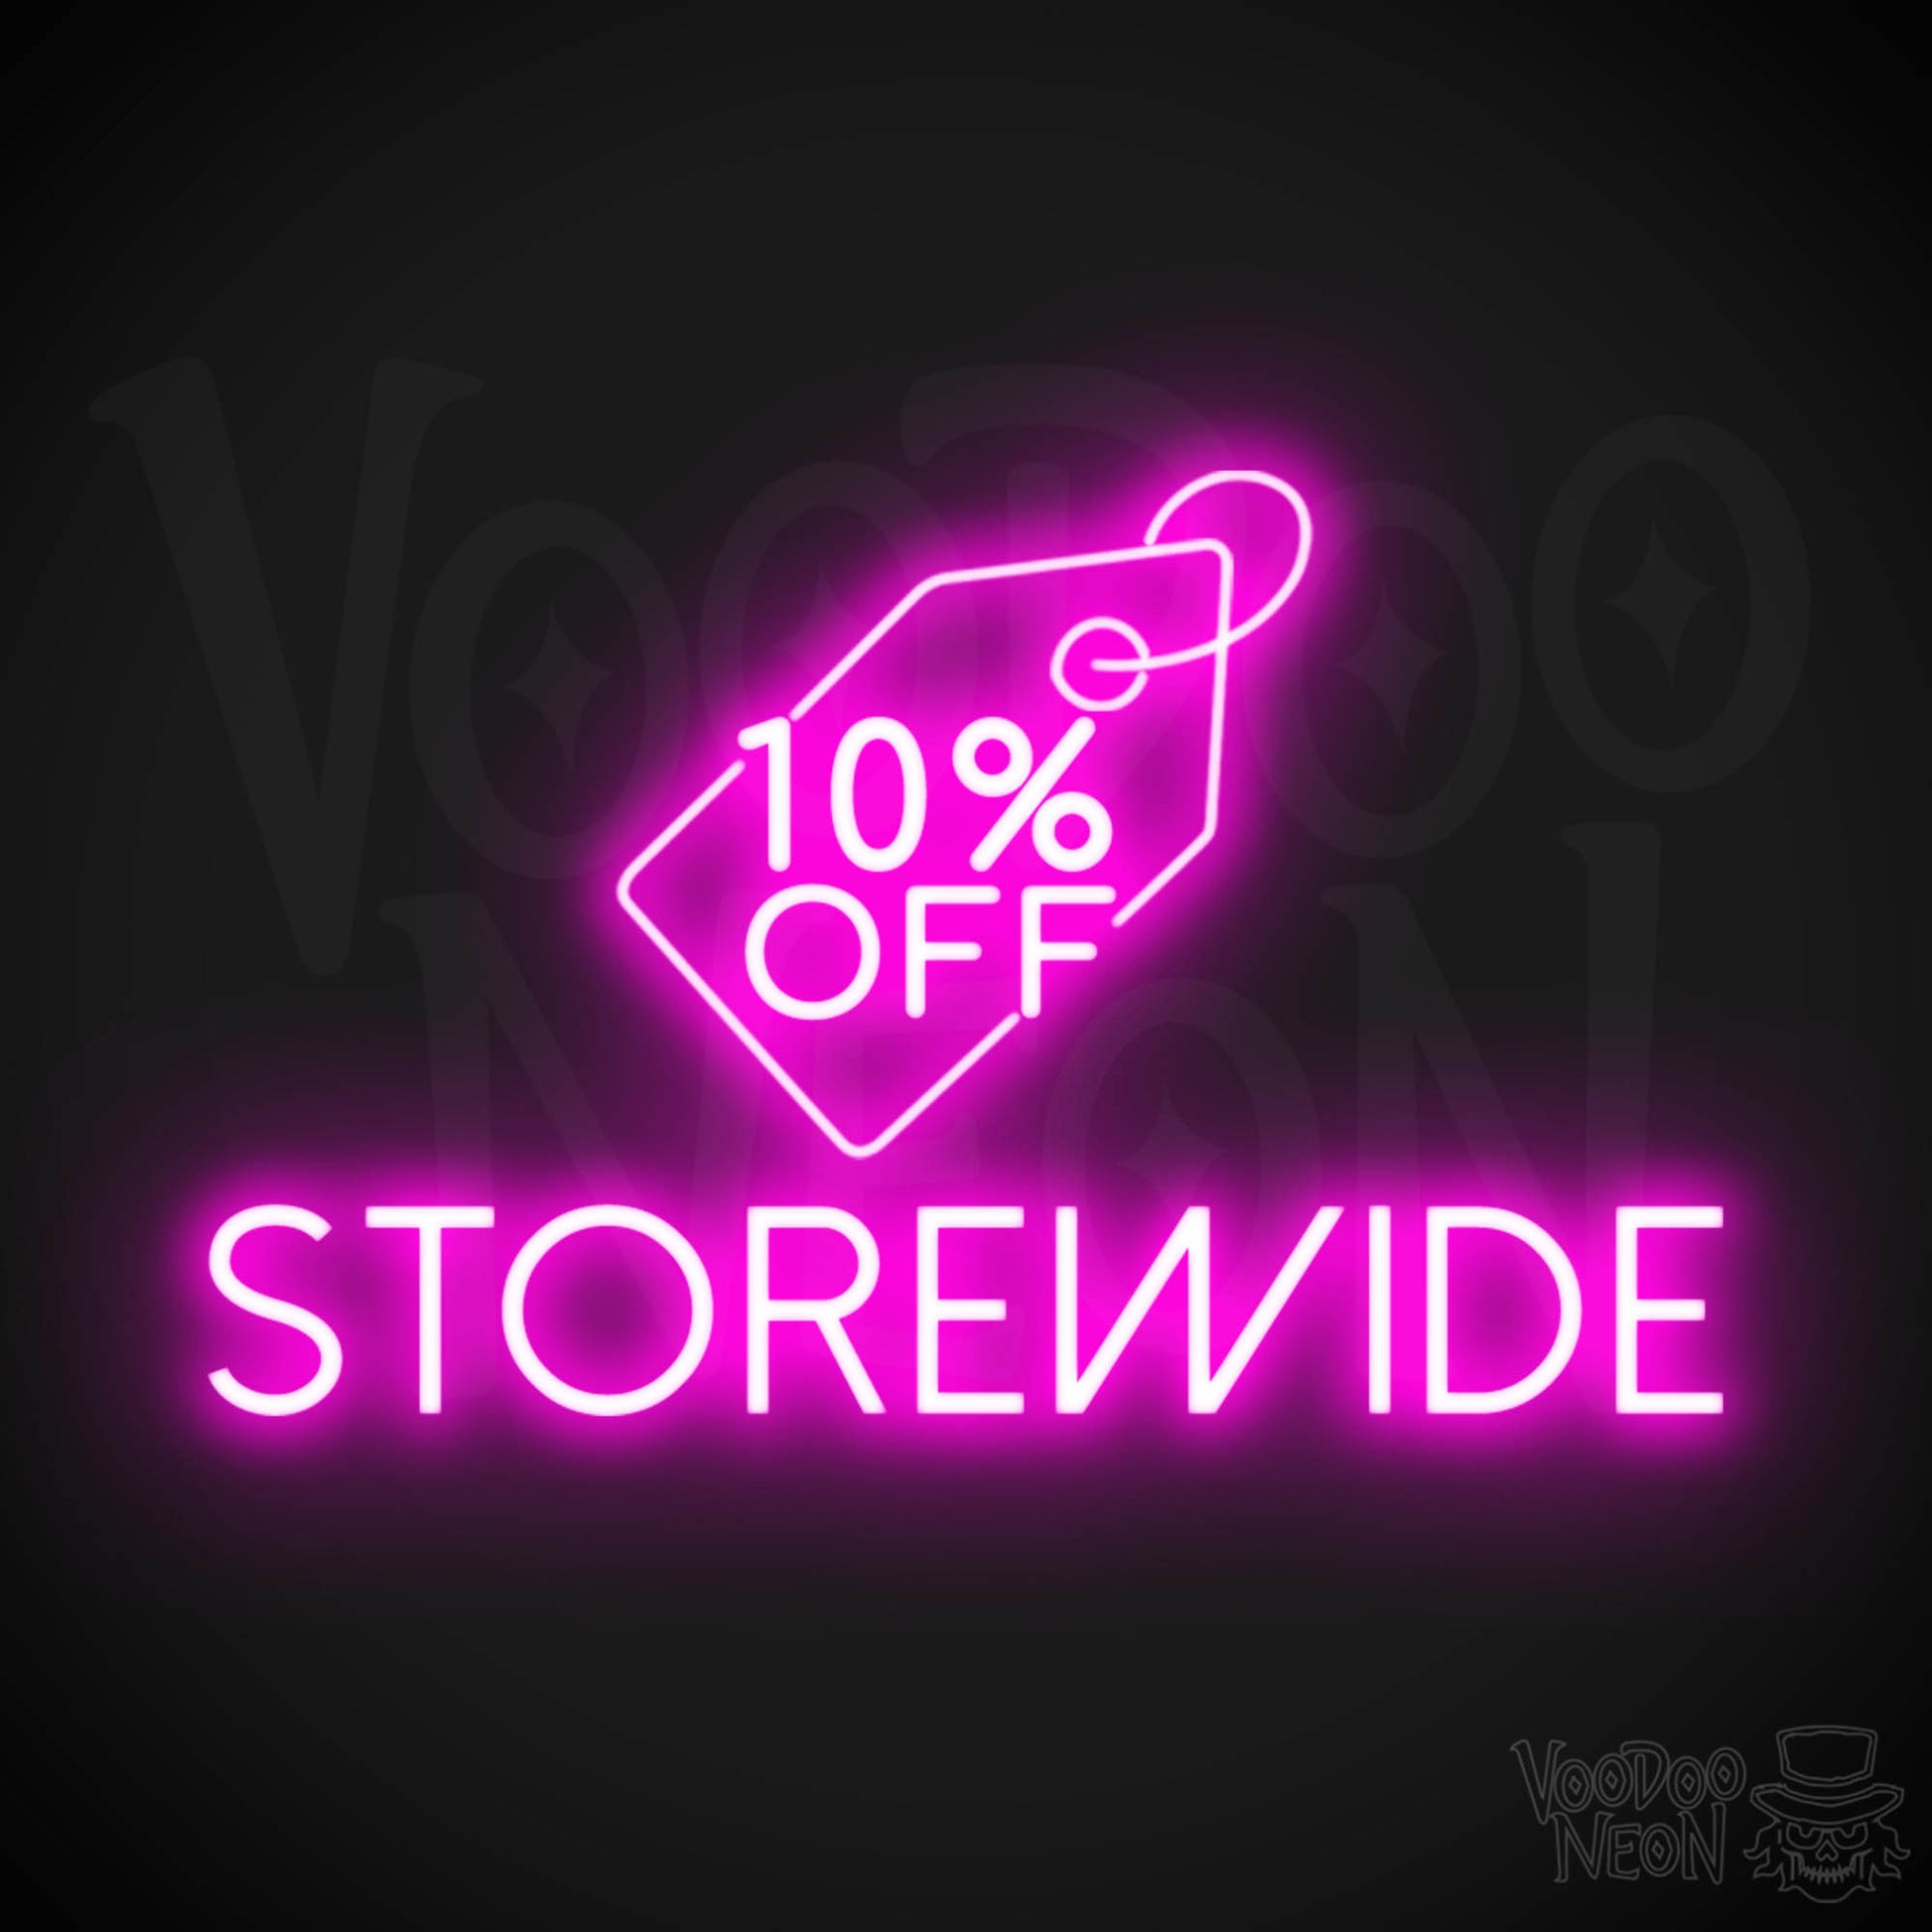 10% Off Storewide Neon Sign - 10% Off Storewide Sign - Neon Shop Signs - Color Pink